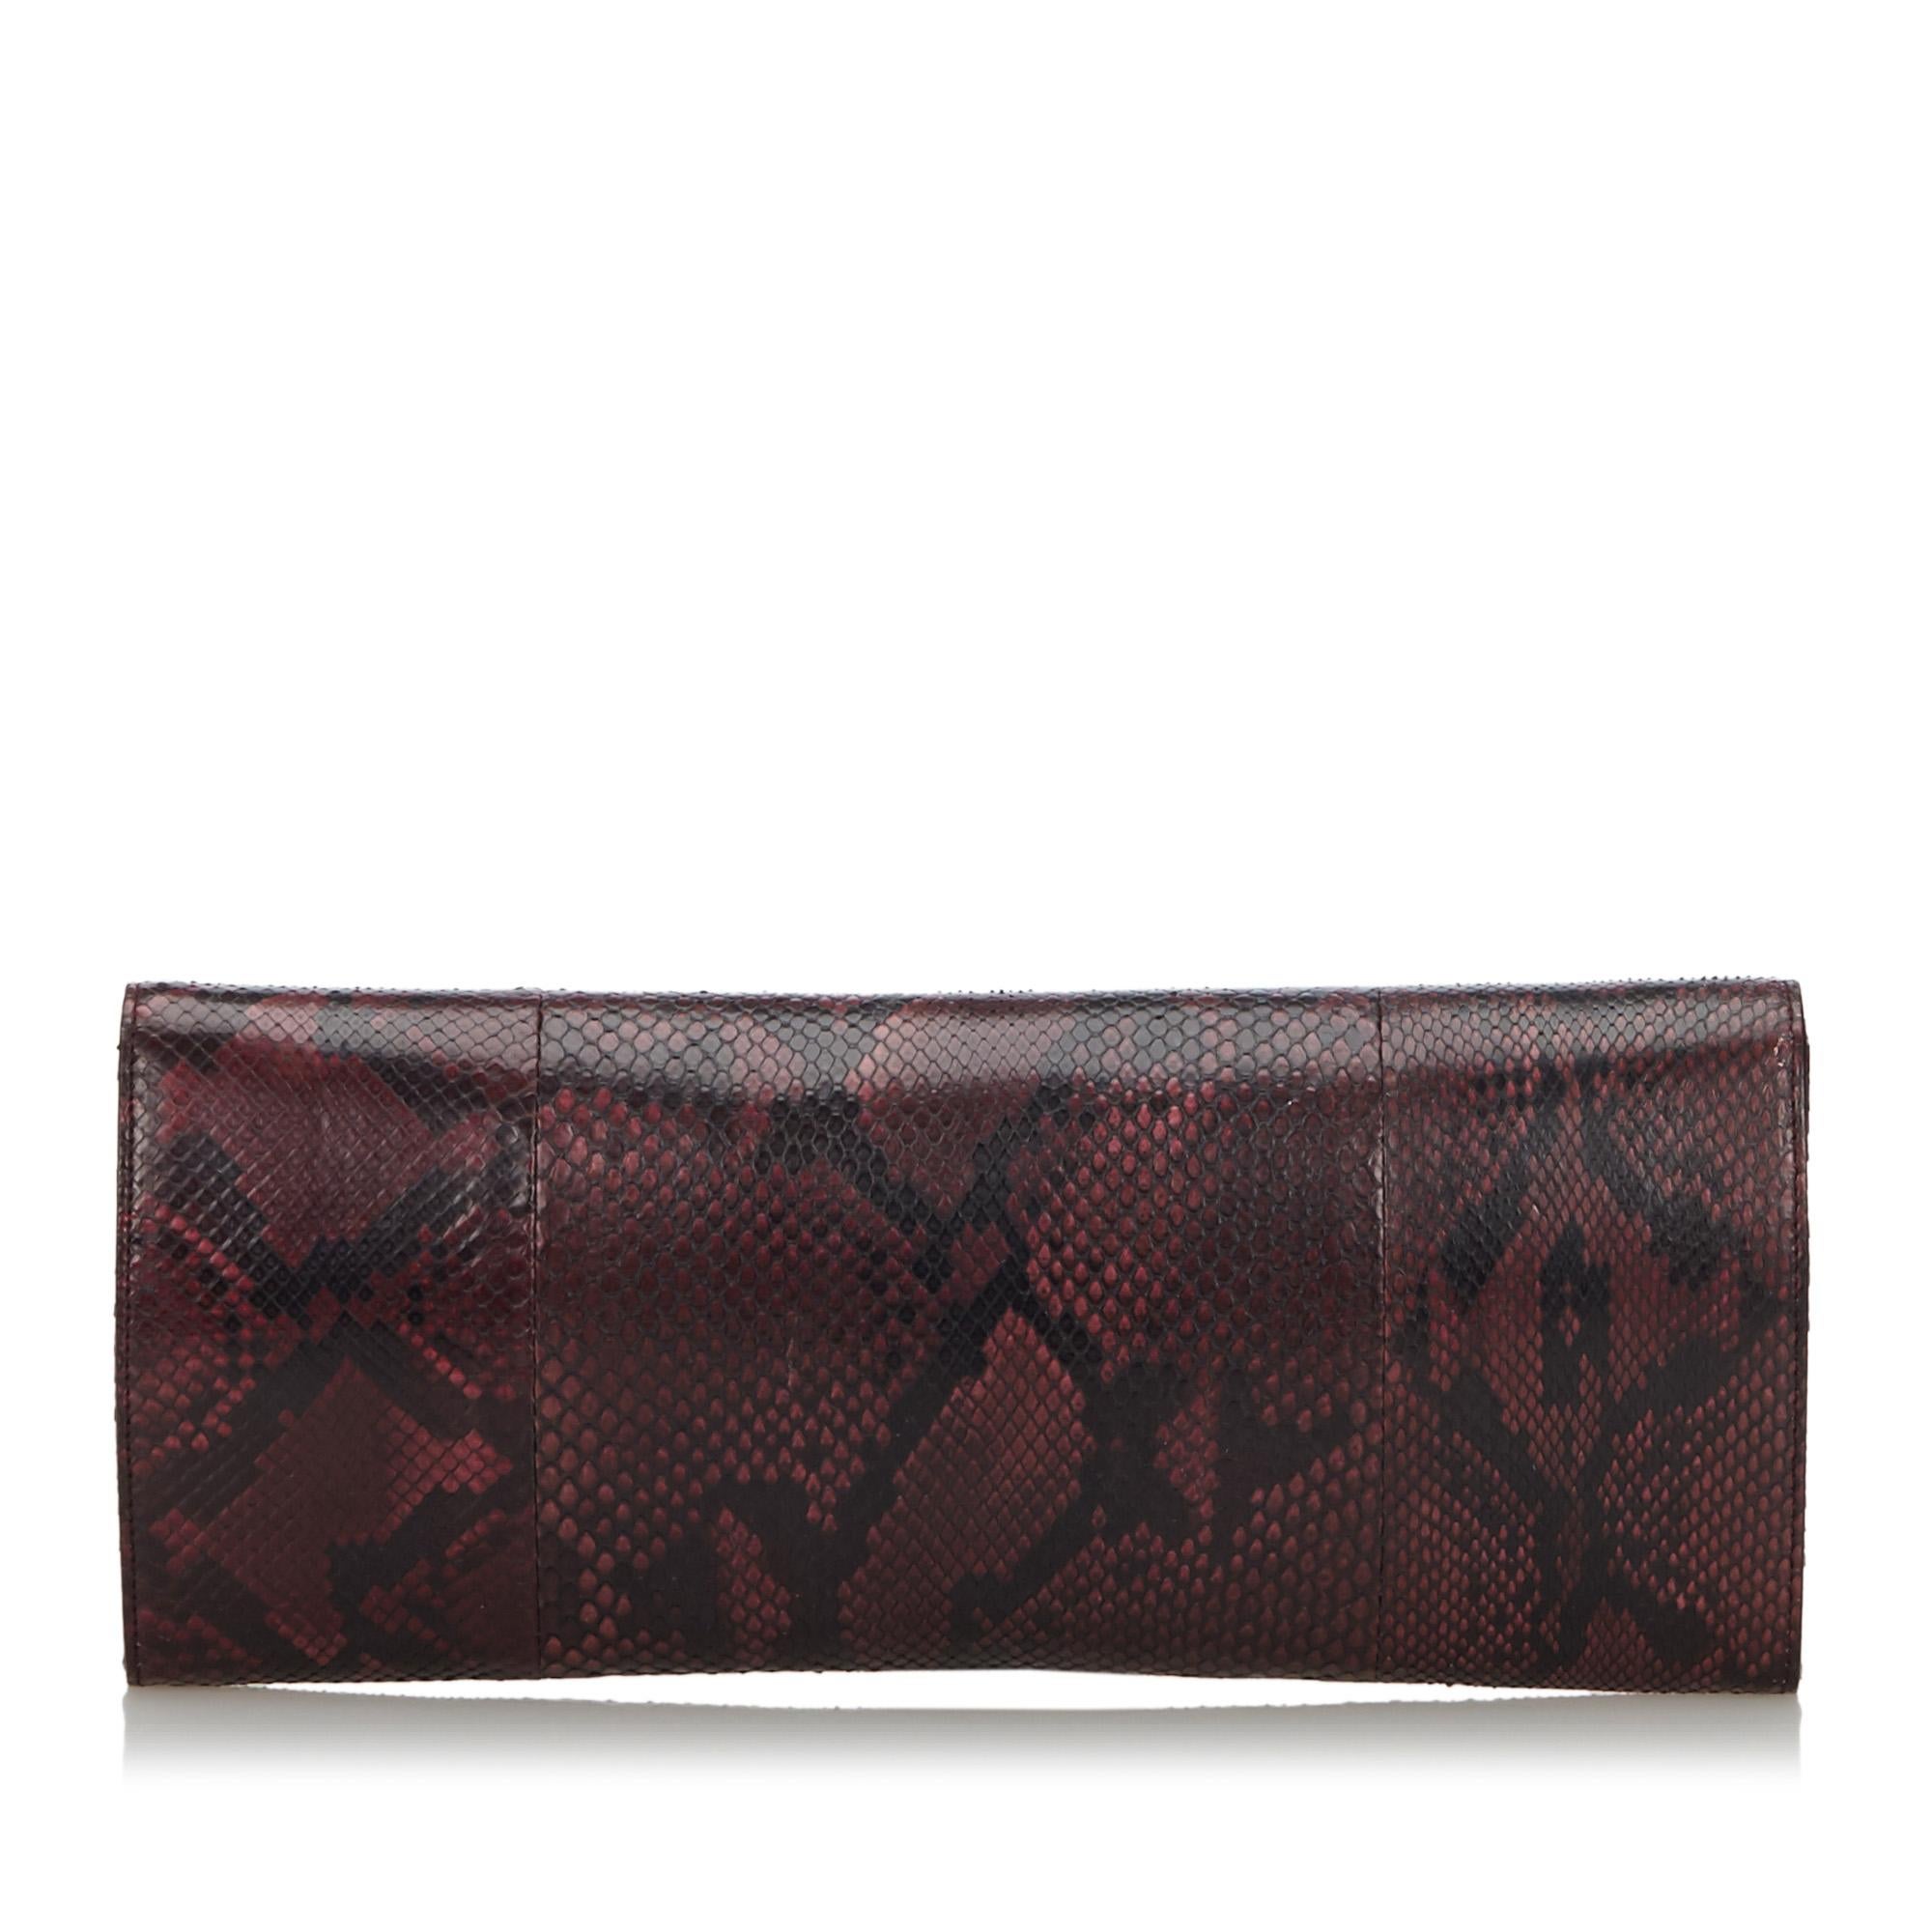 gucci red dust bag